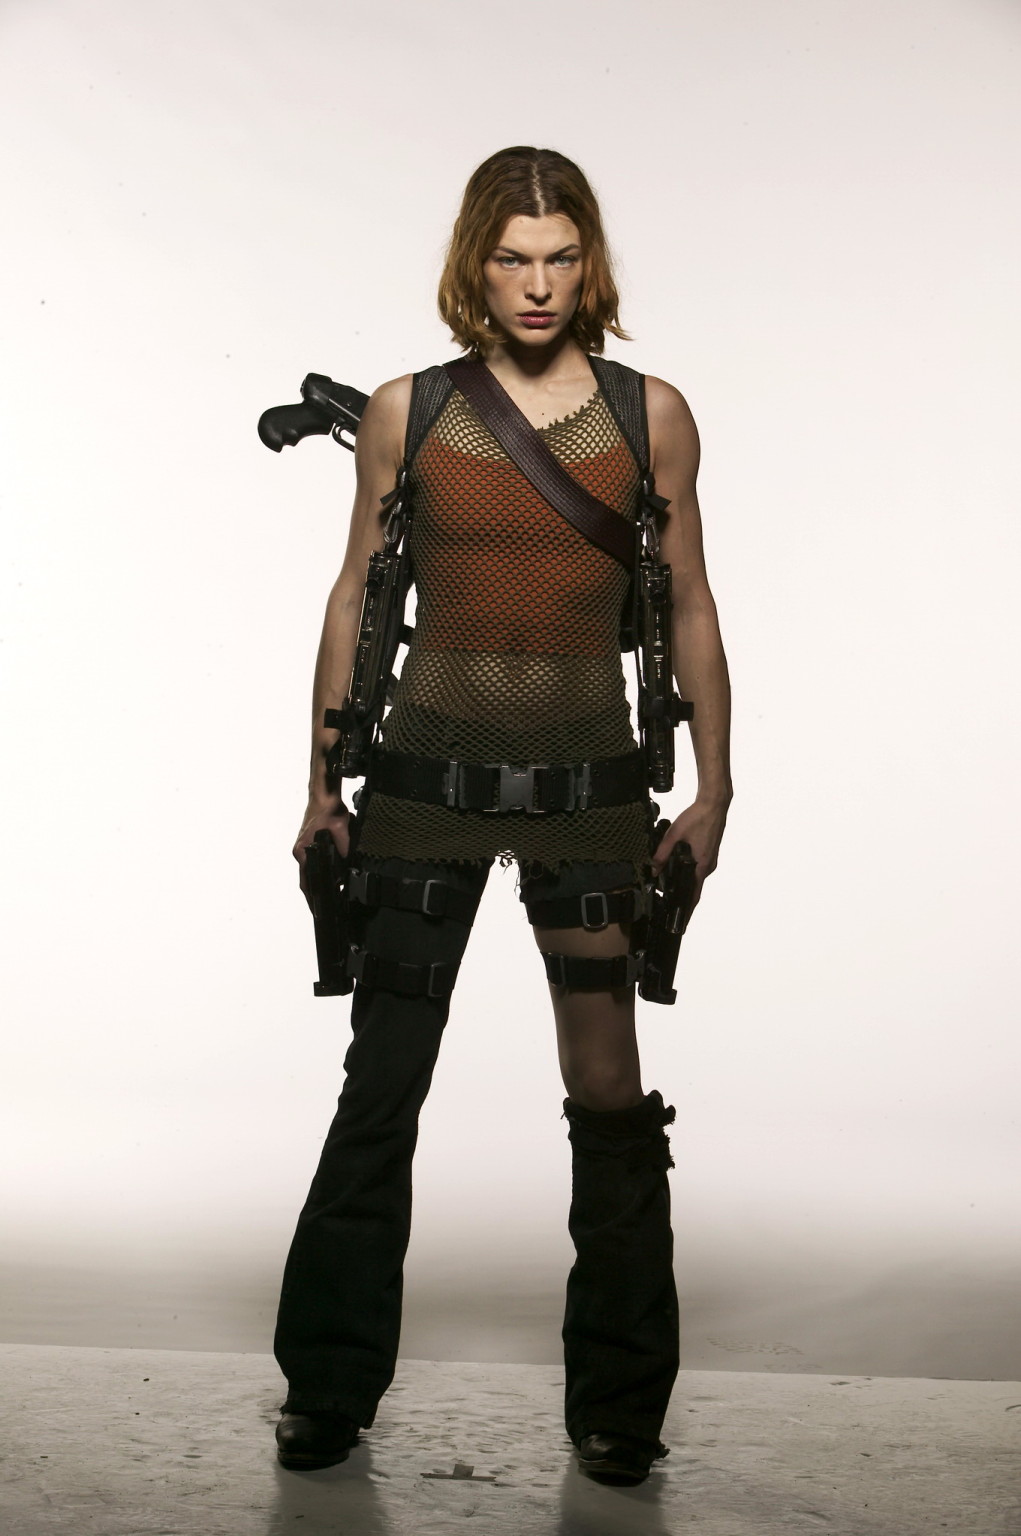 Milla Jovovich looking hot  armed to the teeth in the 'Resident Evil: Apocalypse #75233247